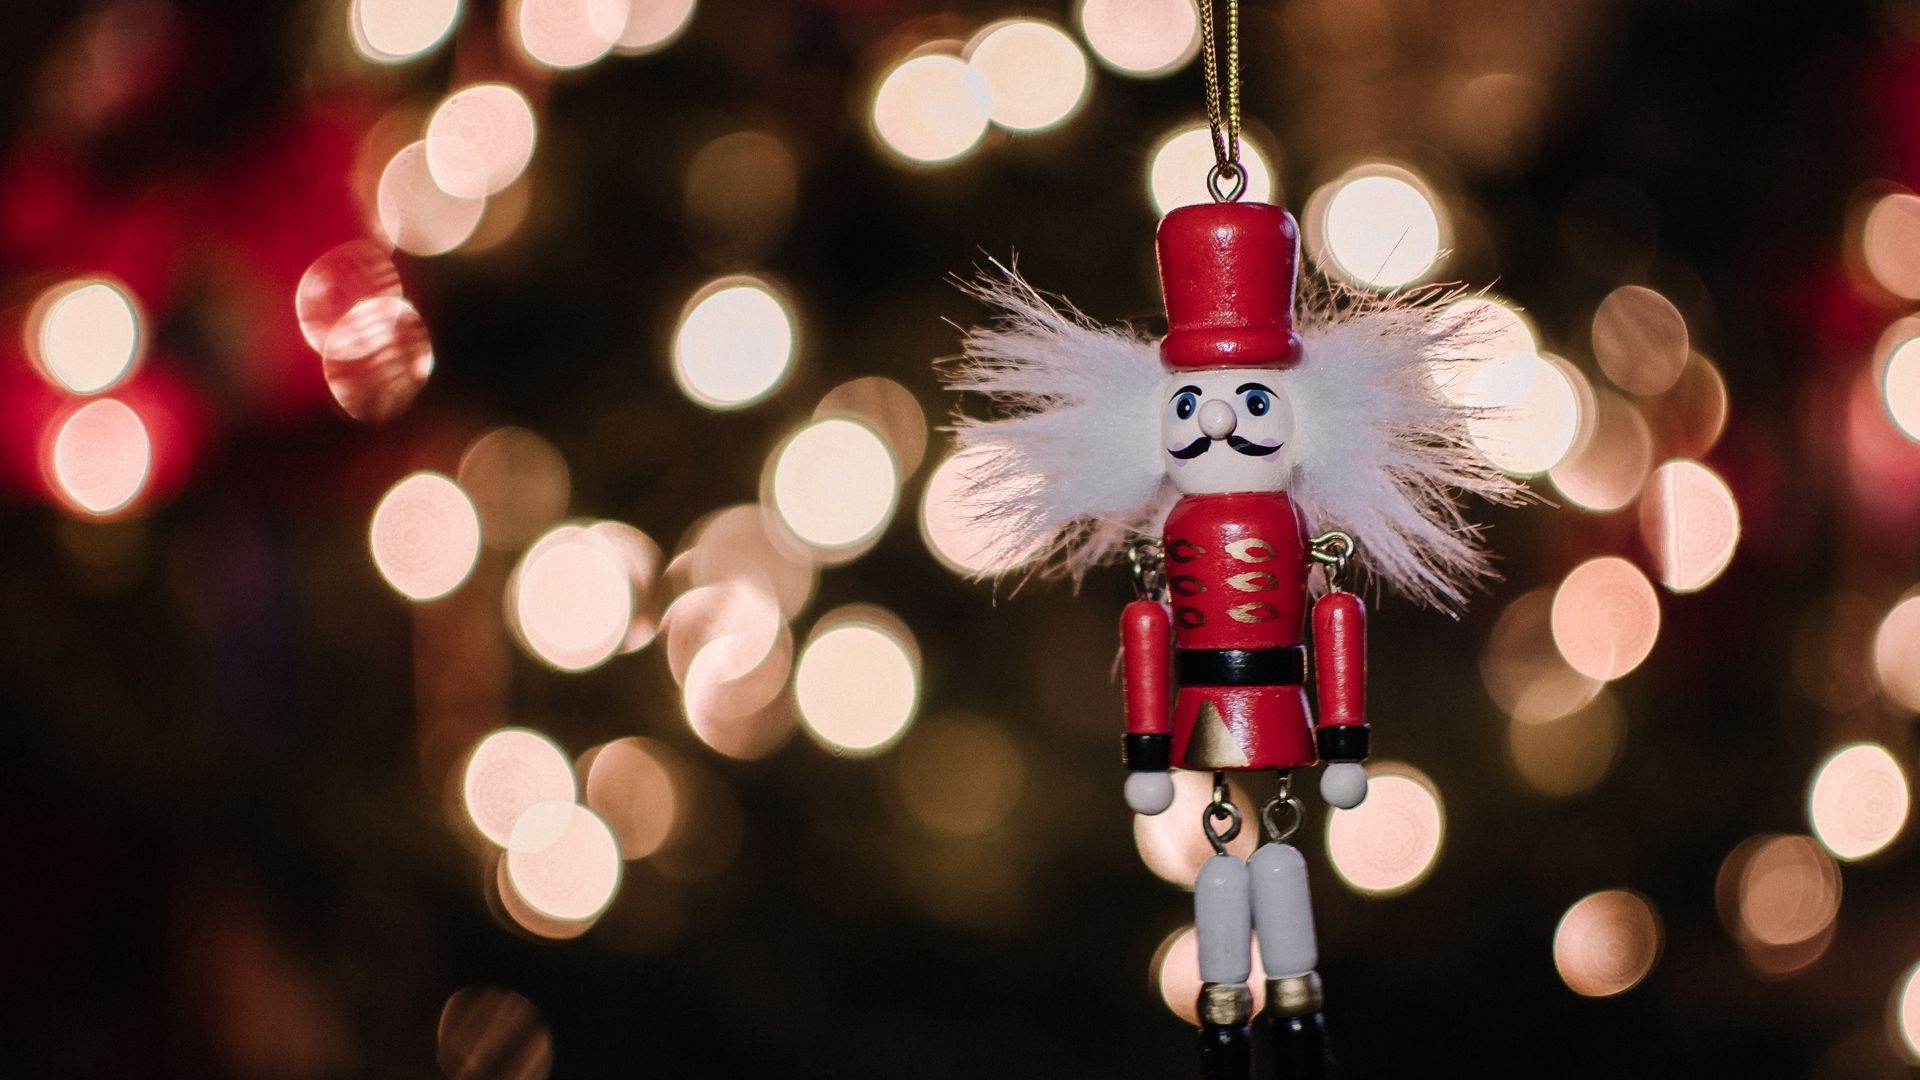 Nutcracker: Originate from late-17th century Germany, A part of German folklore. 1920x1080 Full HD Wallpaper.